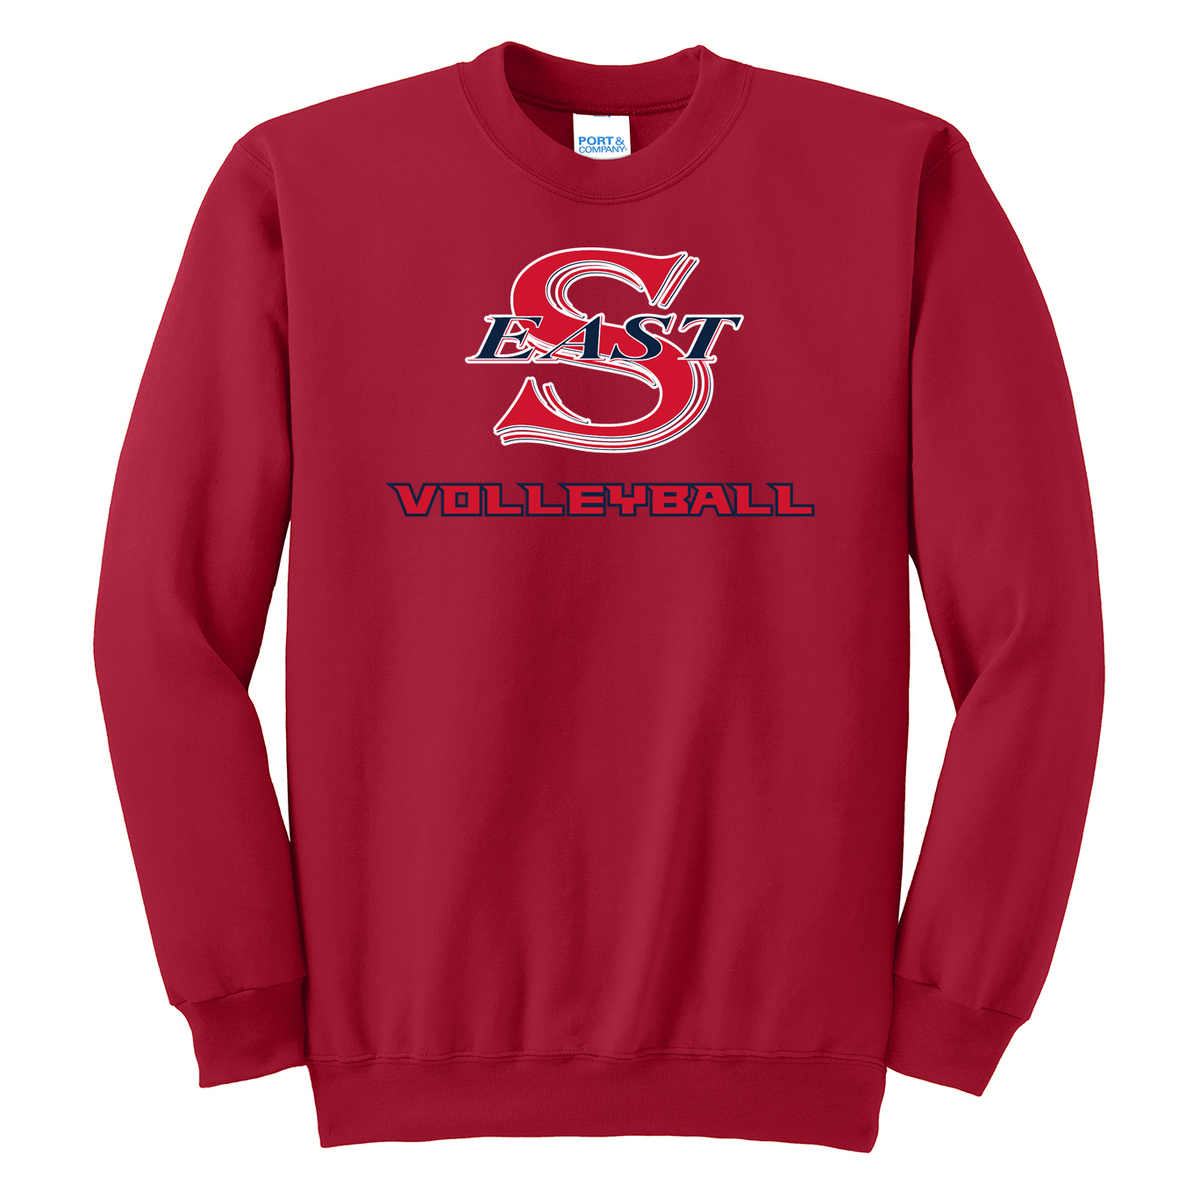 Smithtown East Volleyball Crew Neck Sweater